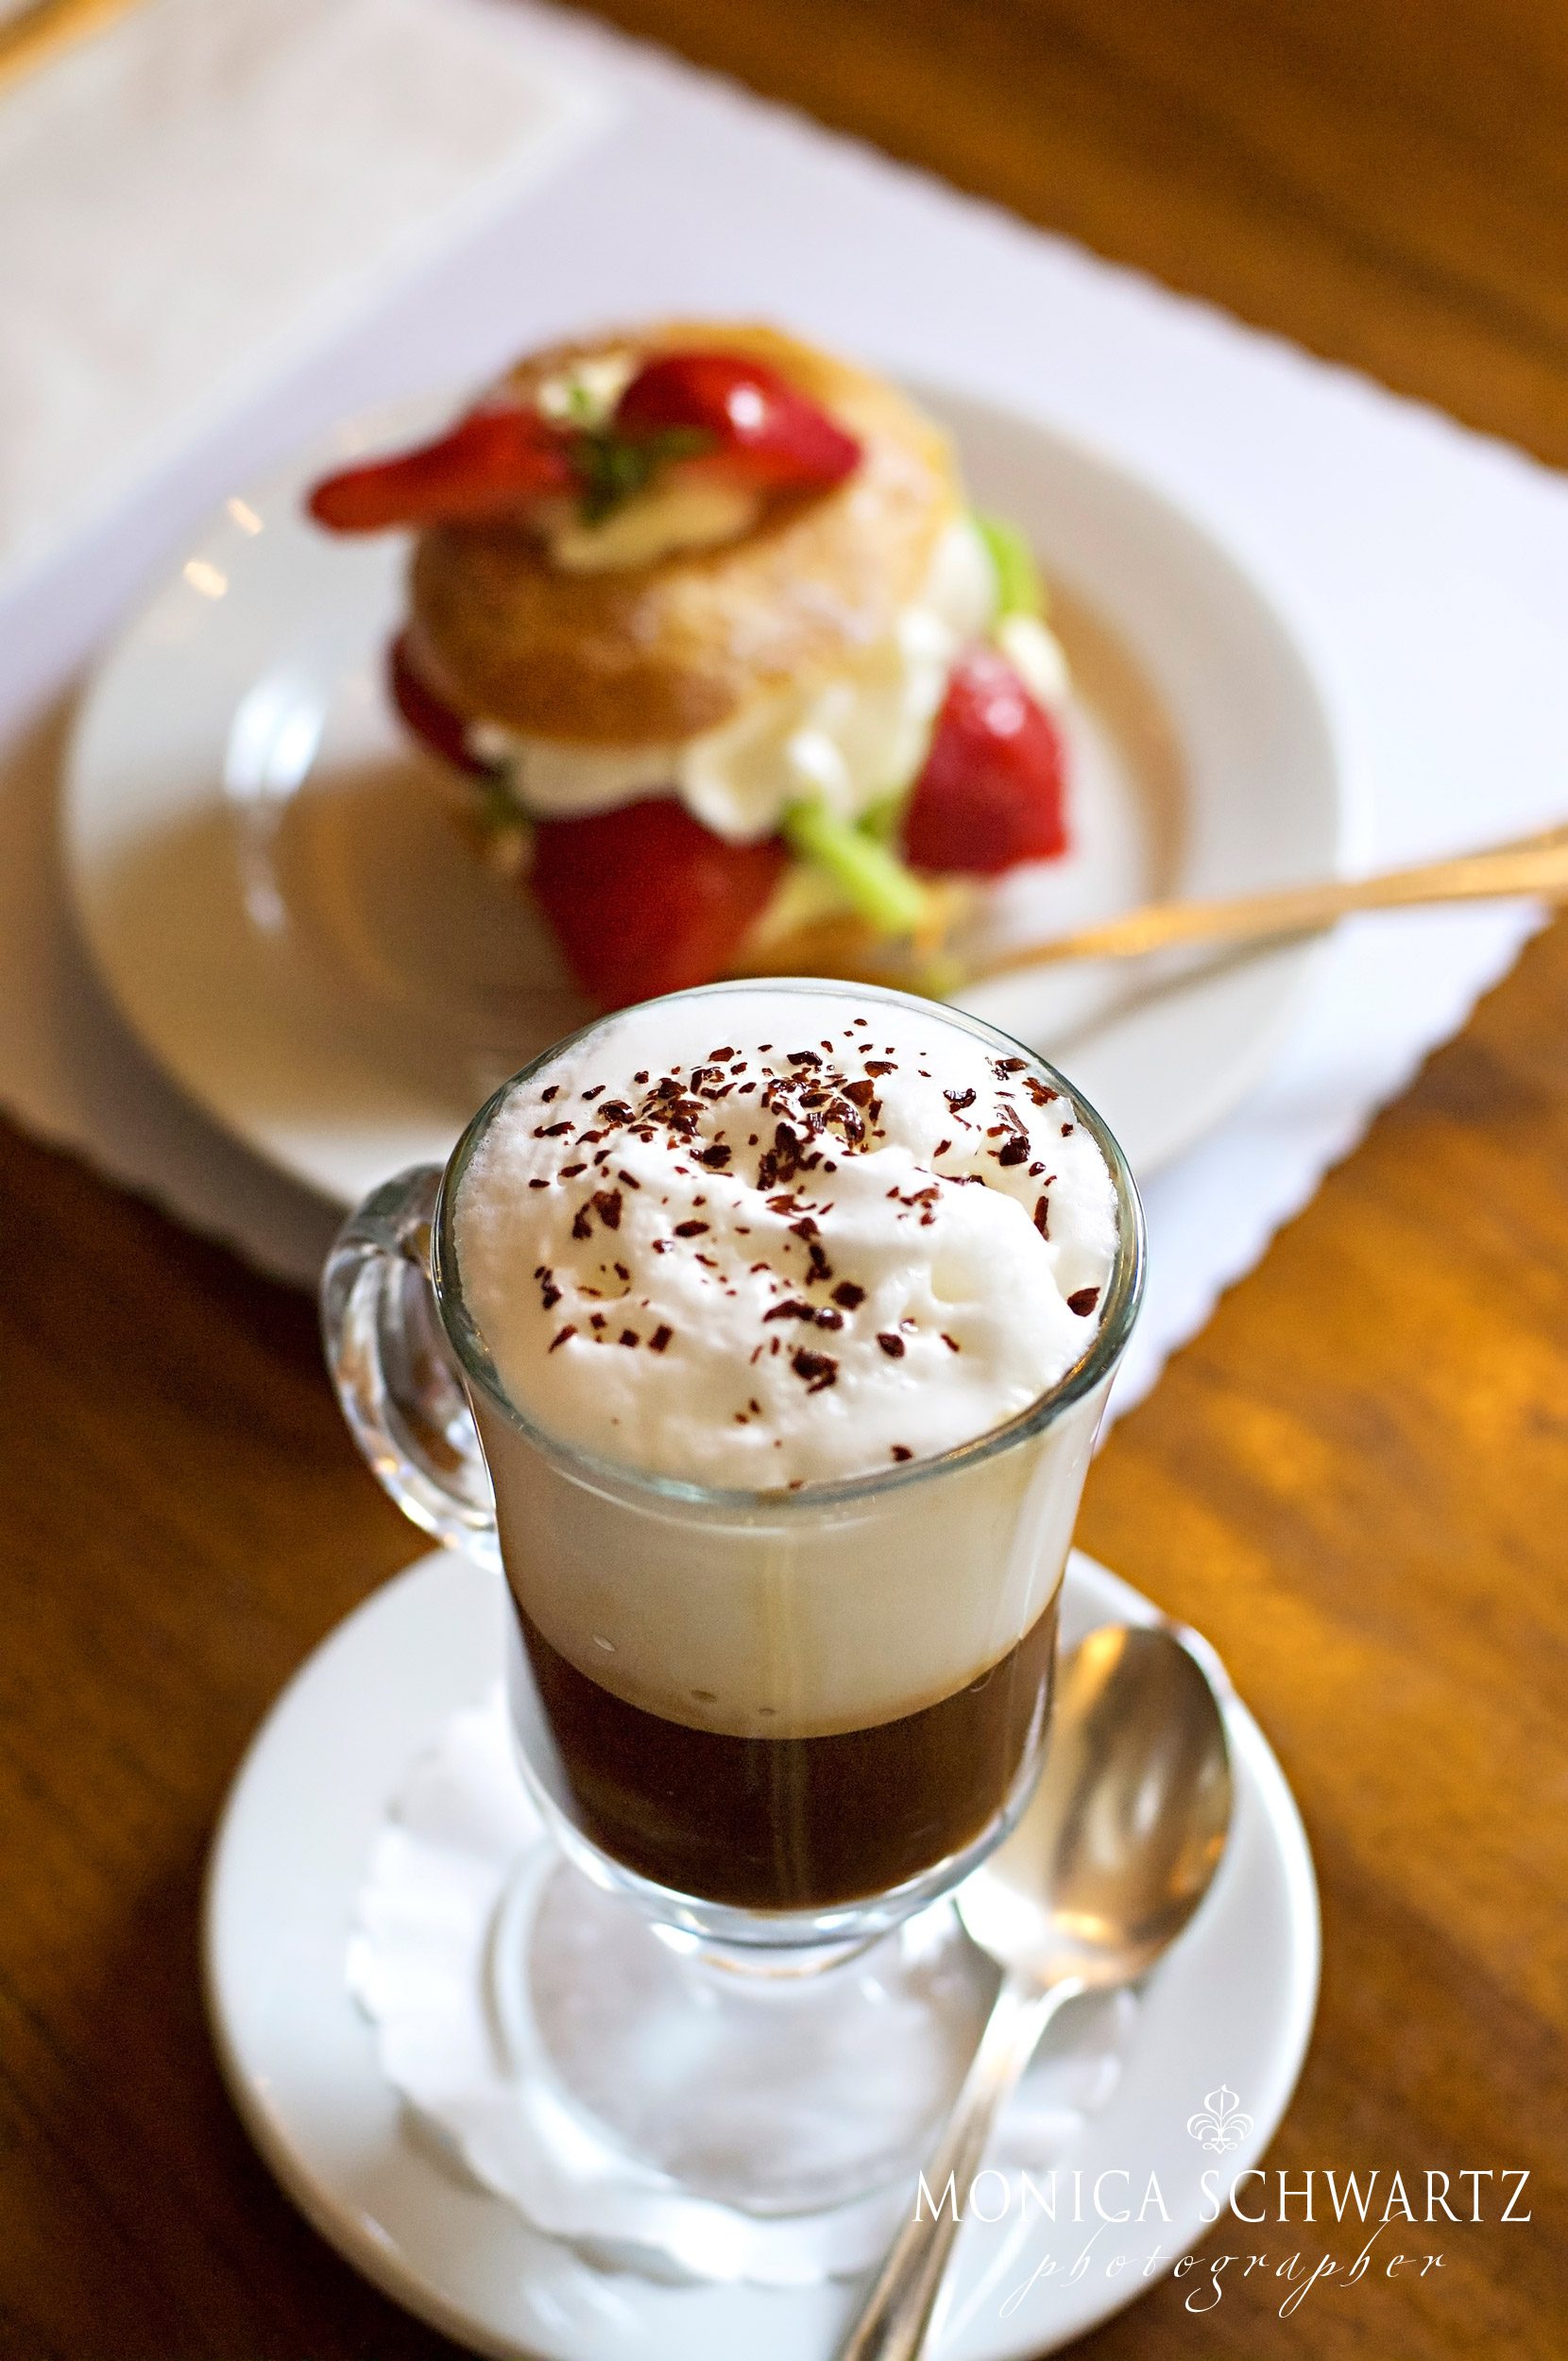 Latte-and-dessert-at-Patisserie-Boissiere-Restaurant-in-Carmel-by-the-Sea-California